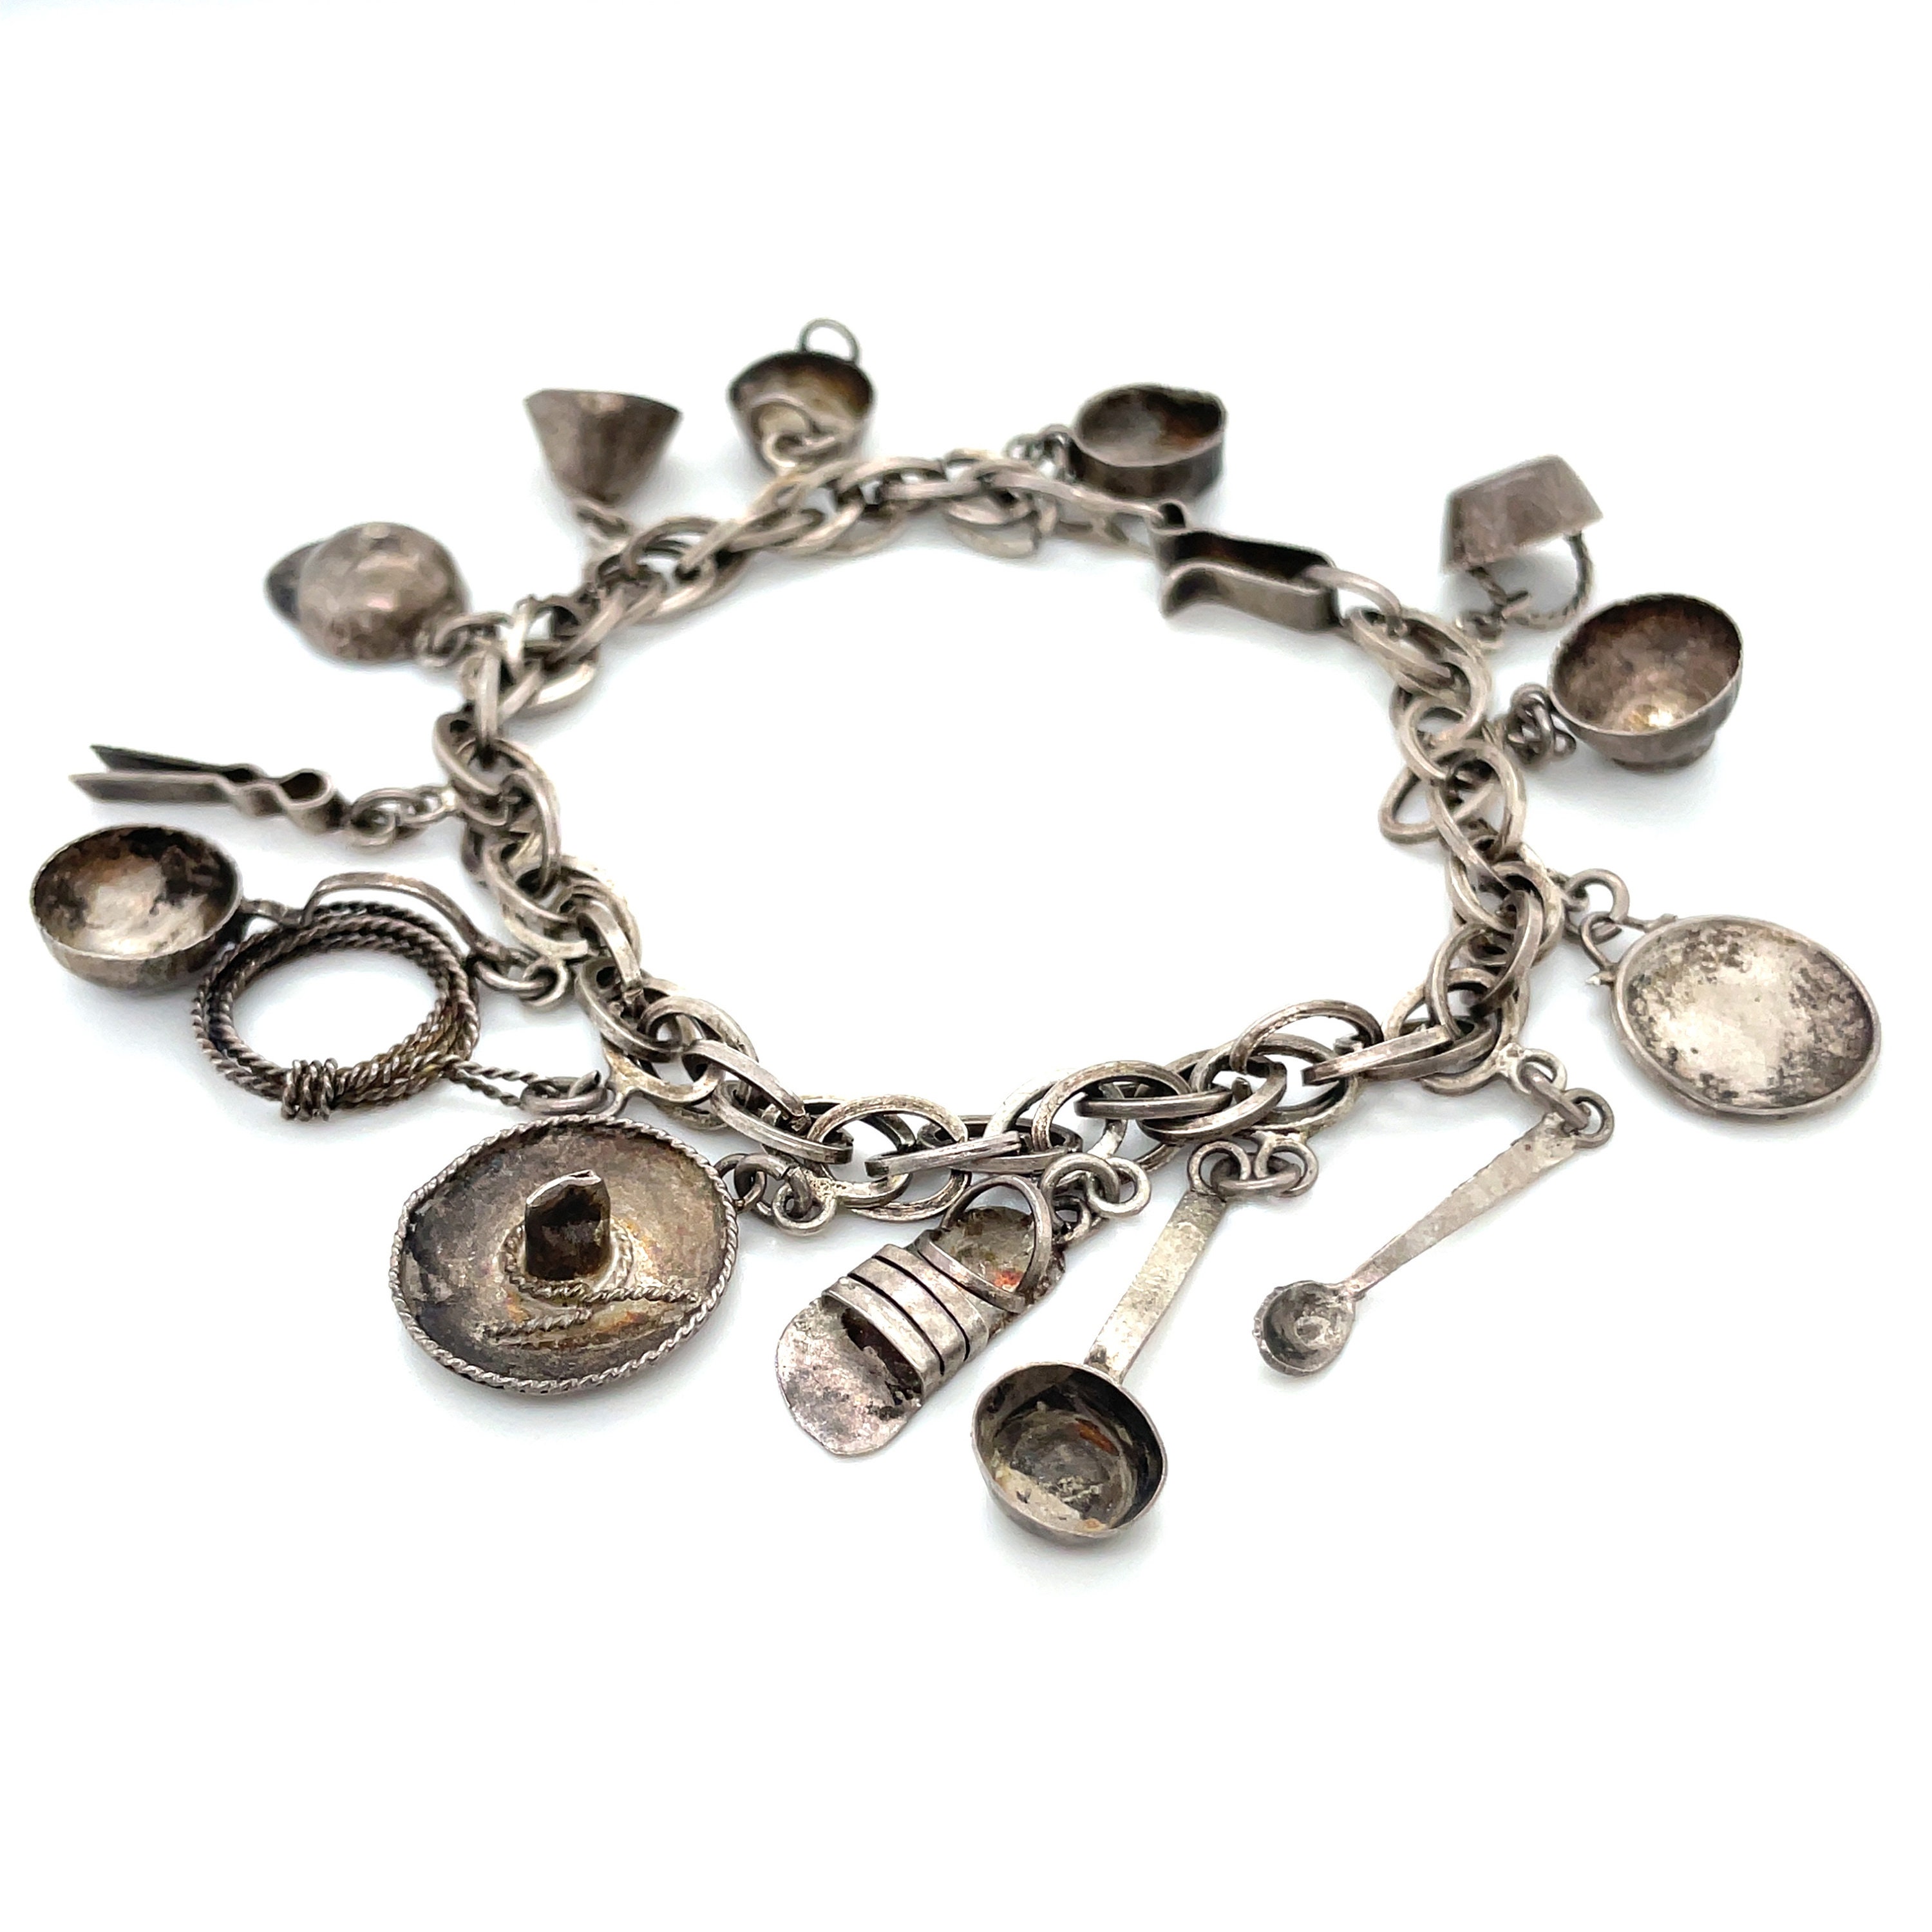 Mexican vintage charm bracelet with Peruvian Inca charms